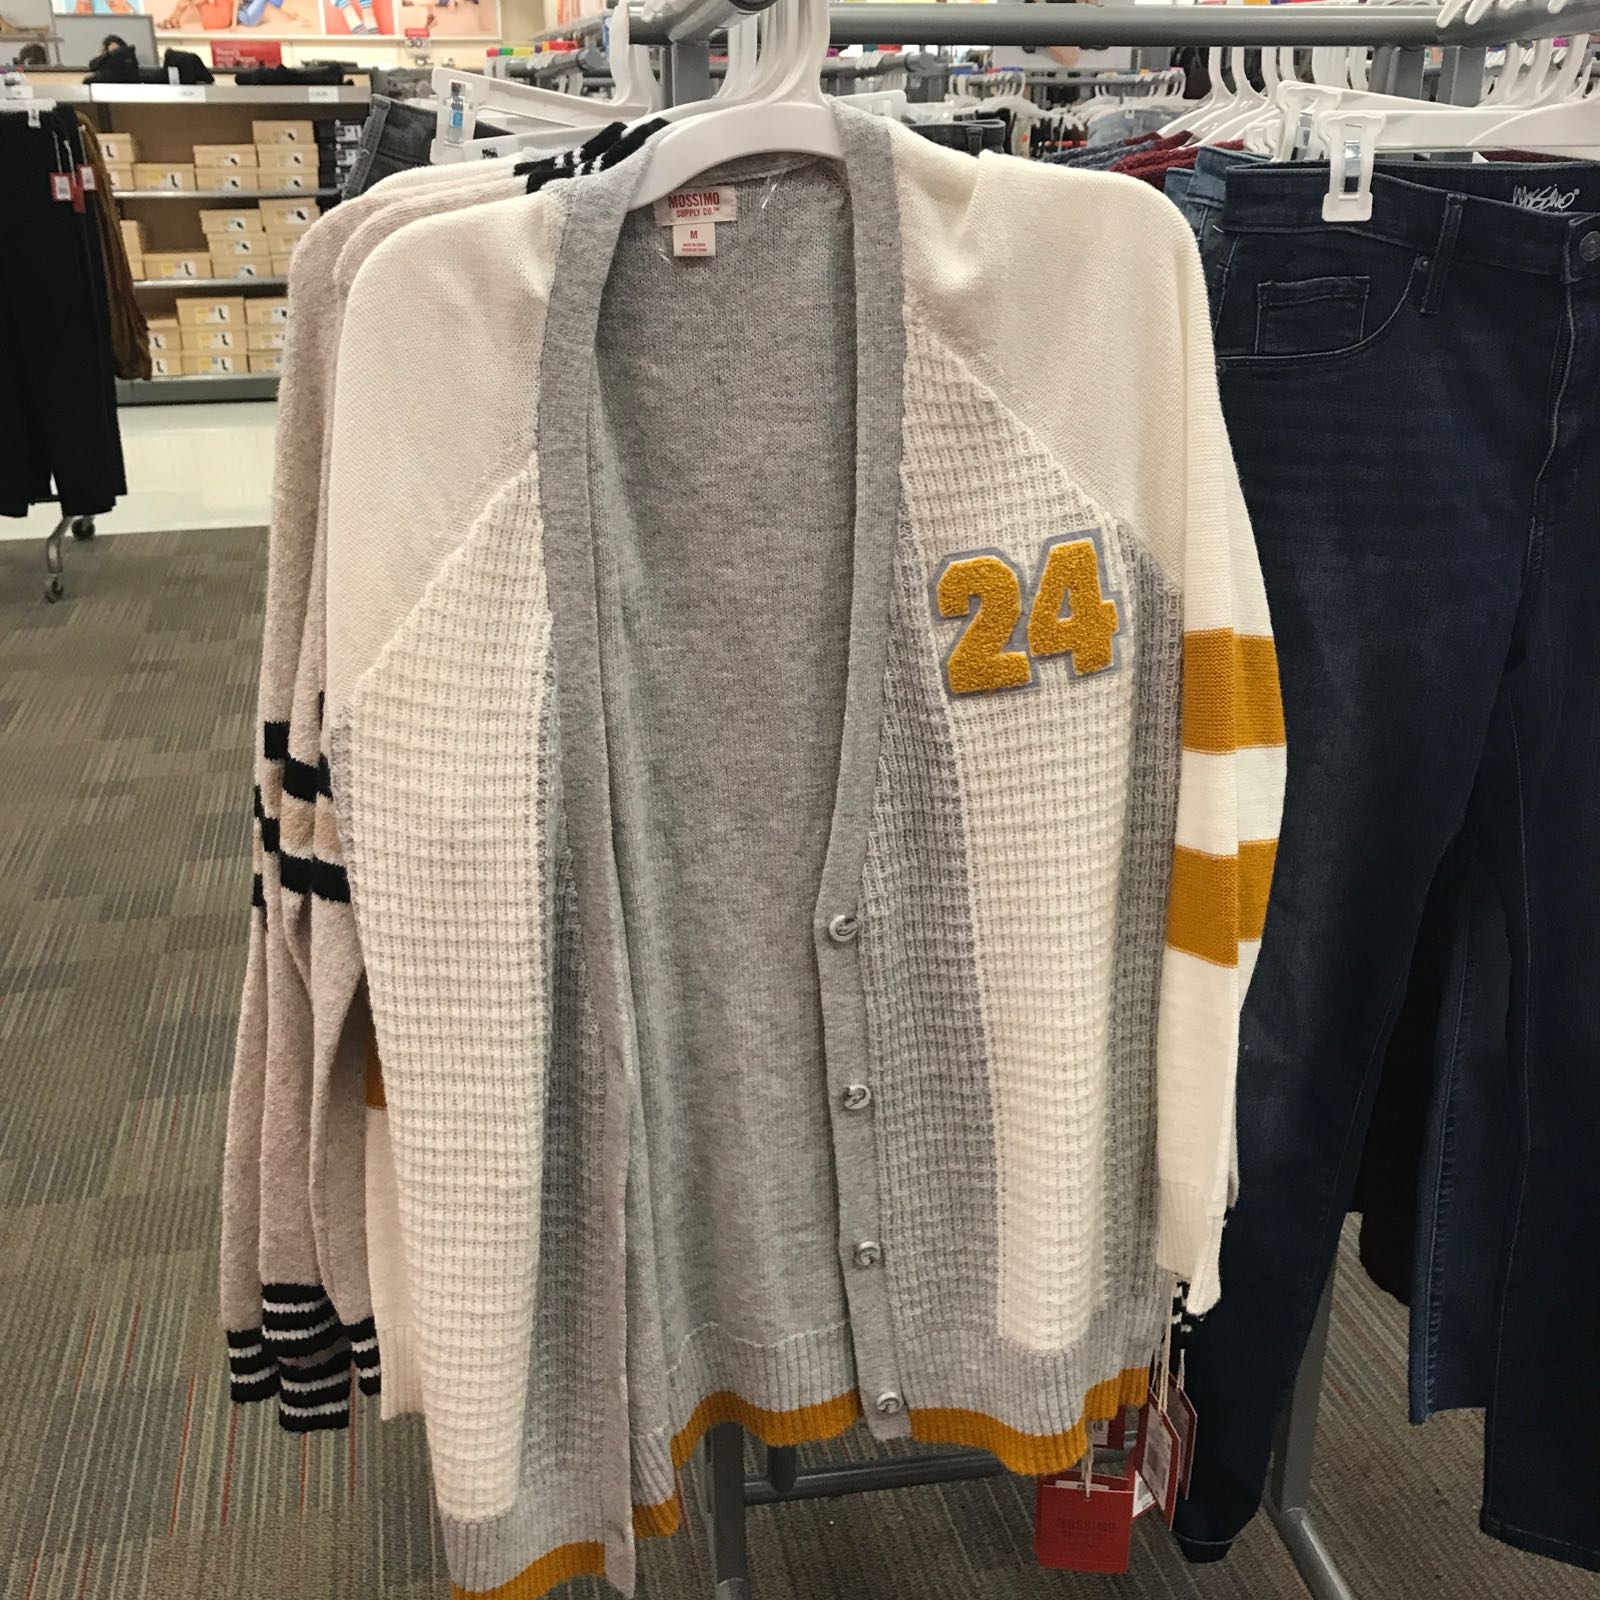 Fall trendspotting at Target reveals the bomber jacket trend.